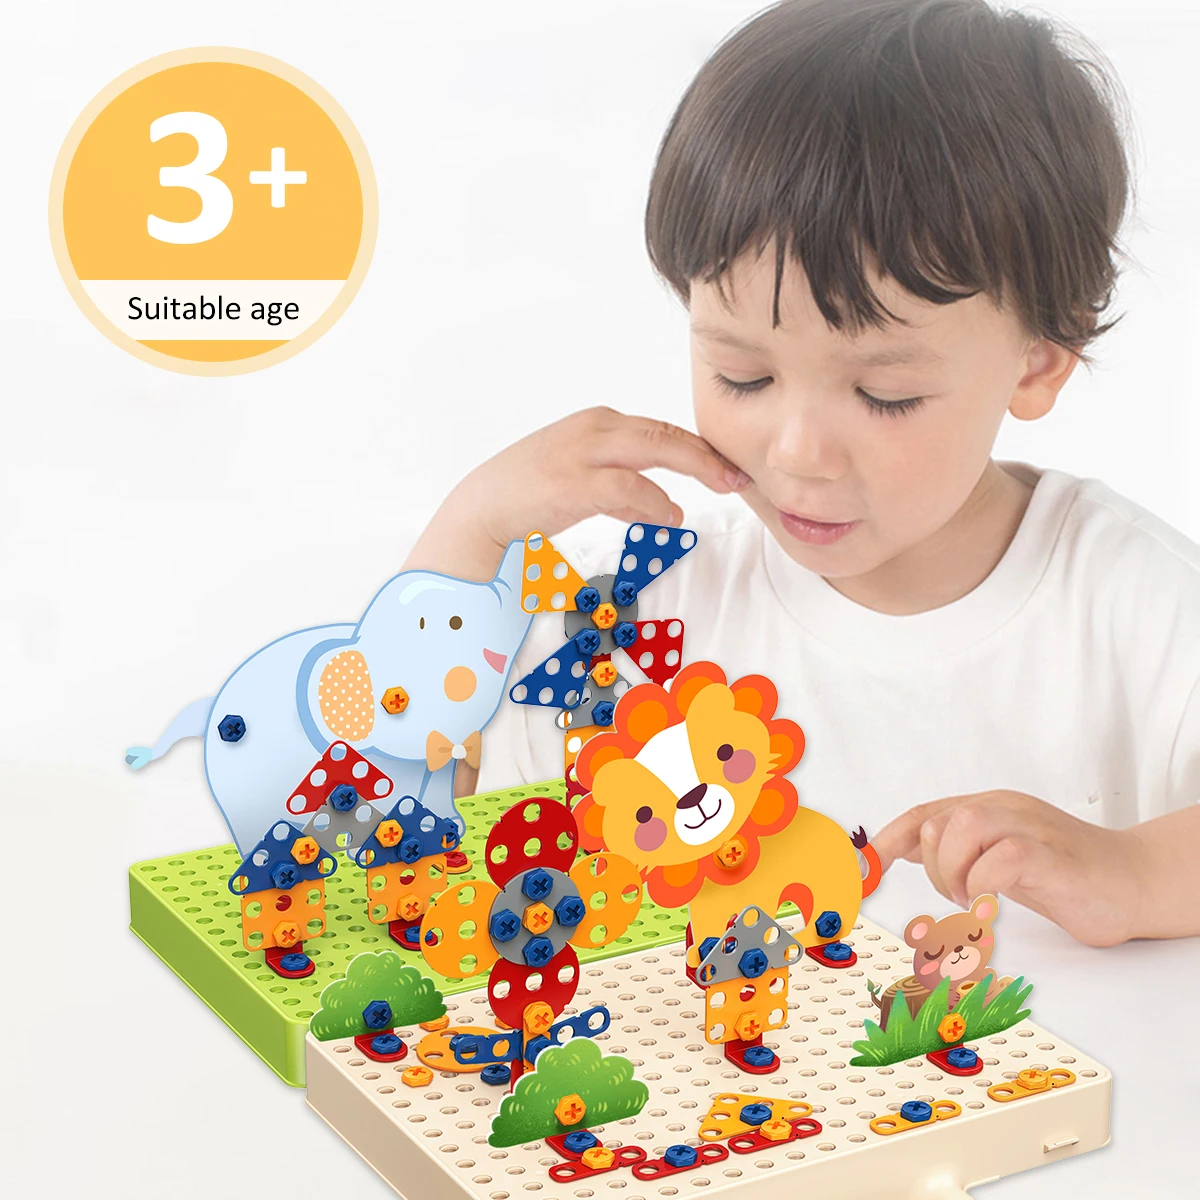 

Kids Drill Screw Nut Puzzles Toys set Pretend Play Tool Drill For Children Disassembly Assembly Building Bricks Kids DIY Toy